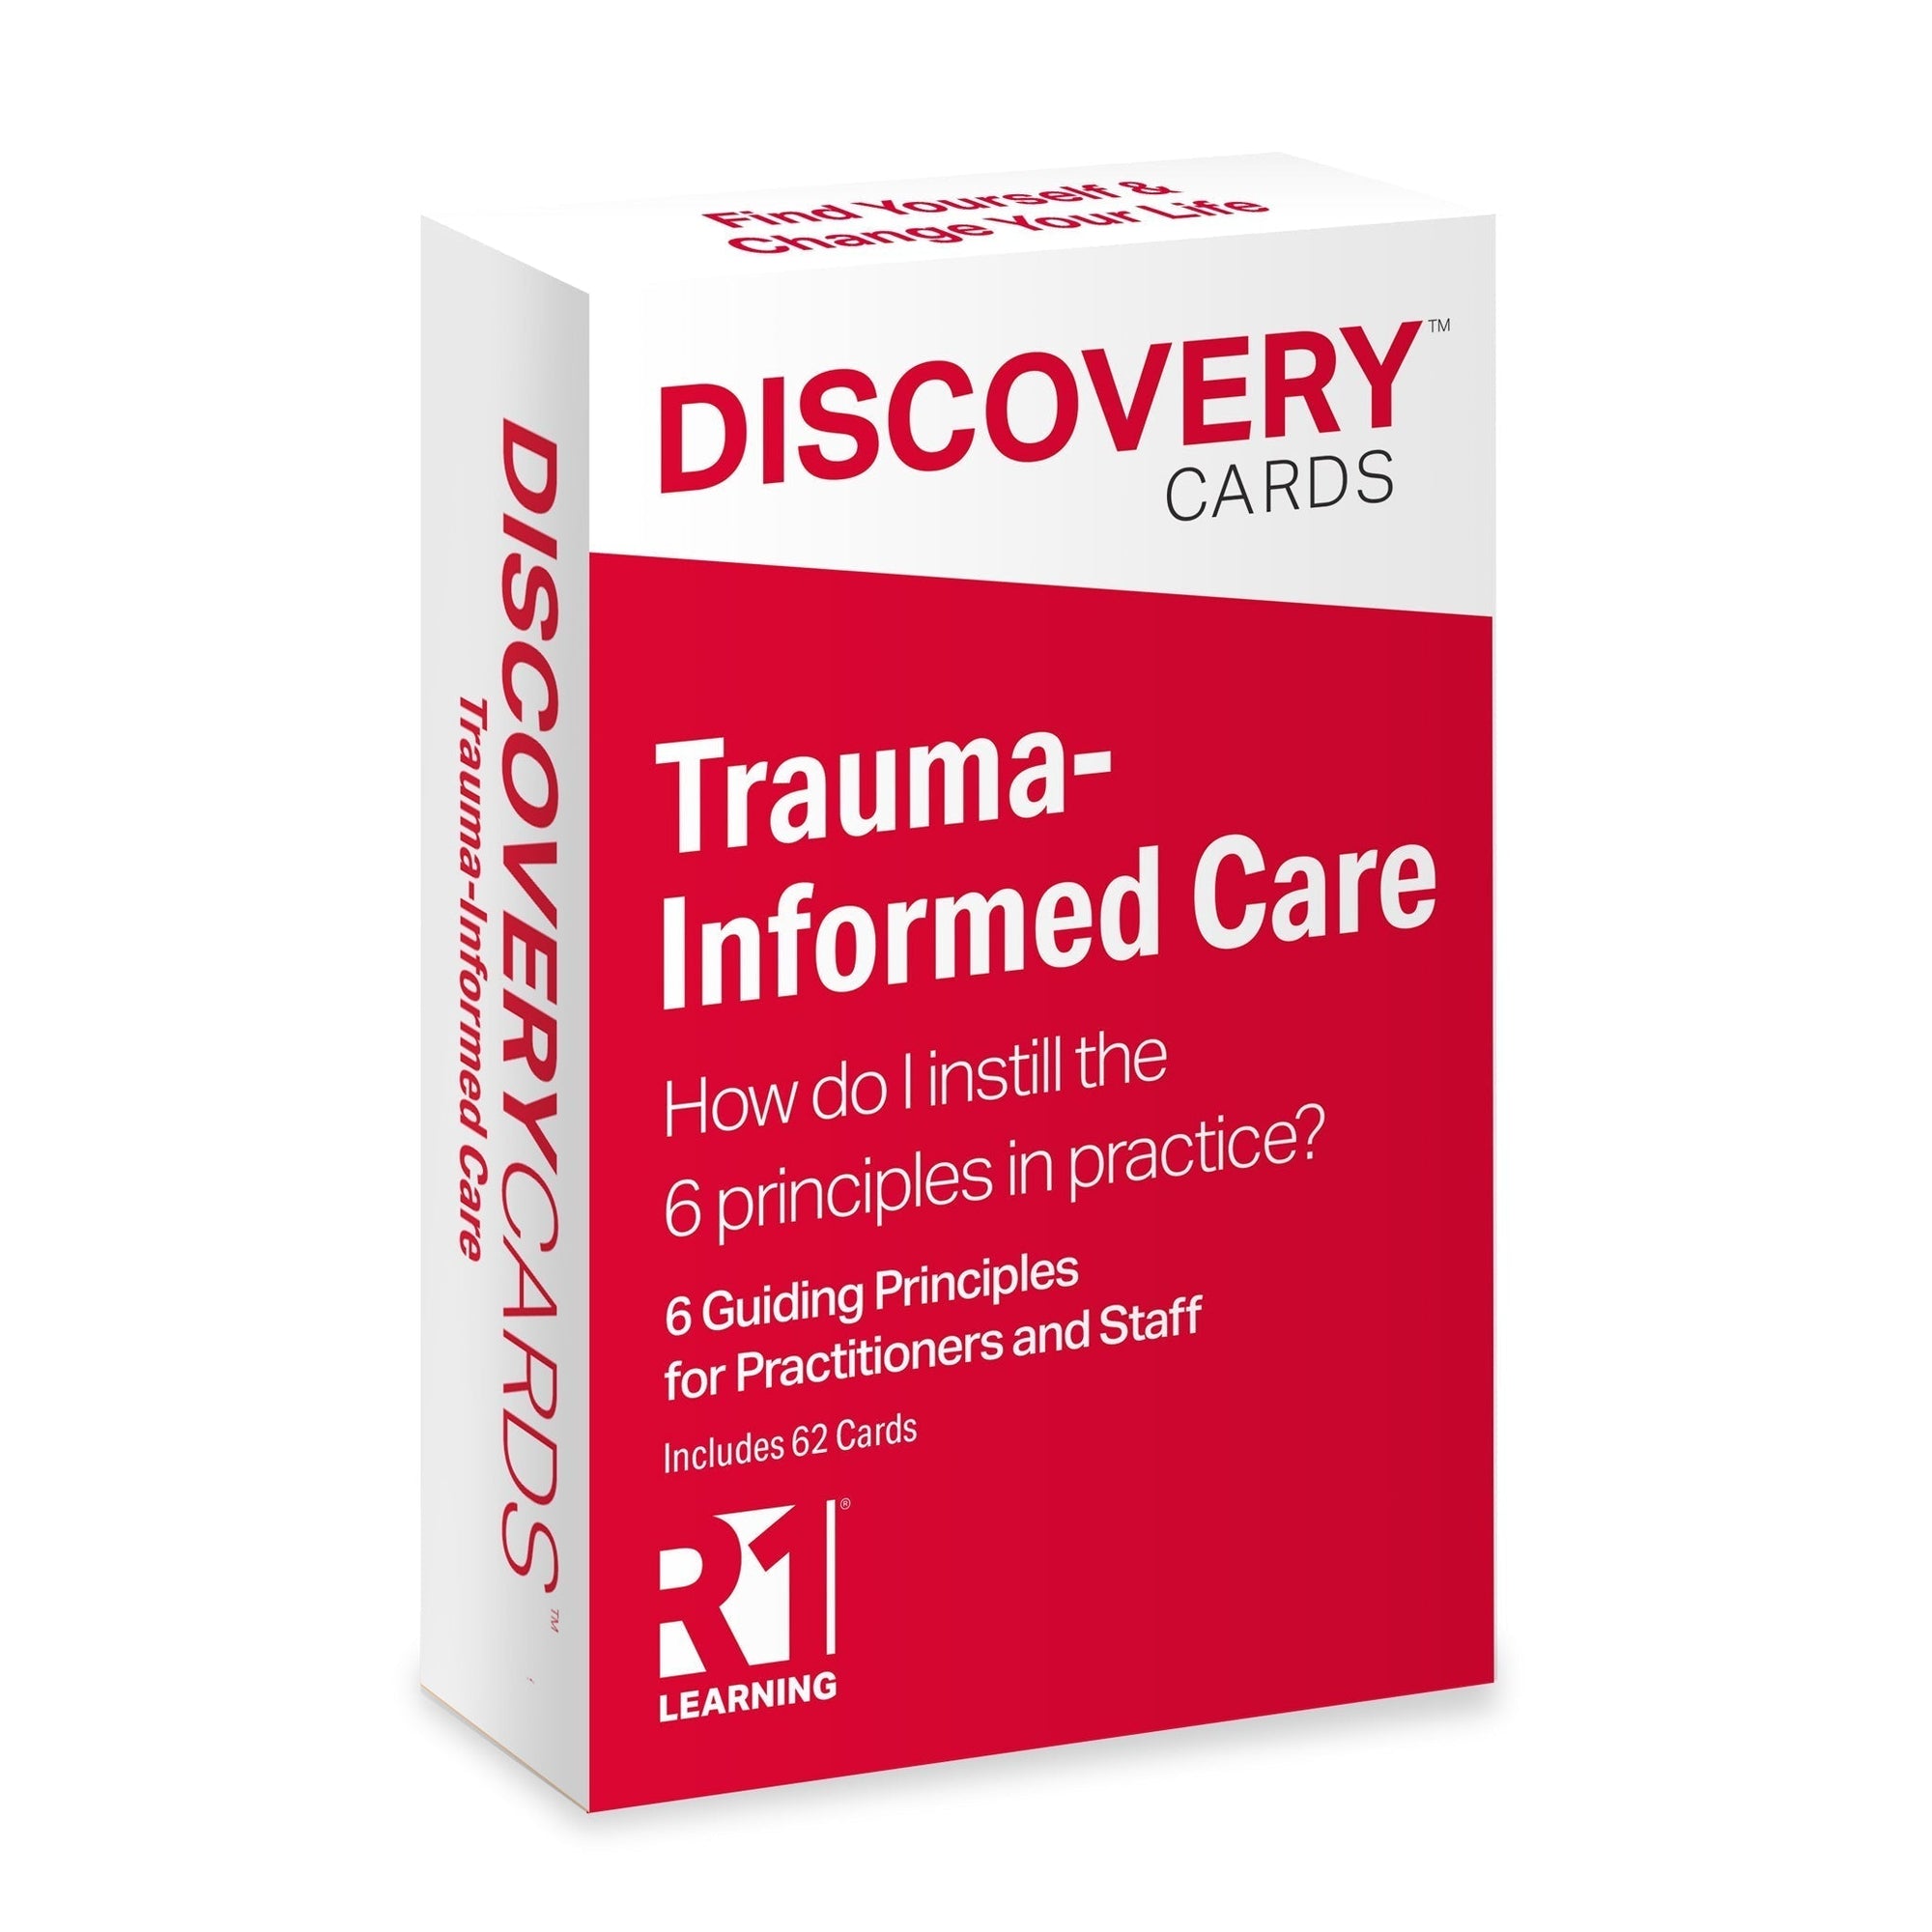 Trauma-Informed Care (ME) Discovery Cards Value Pack — 6 deck, for Practitioners and Staff